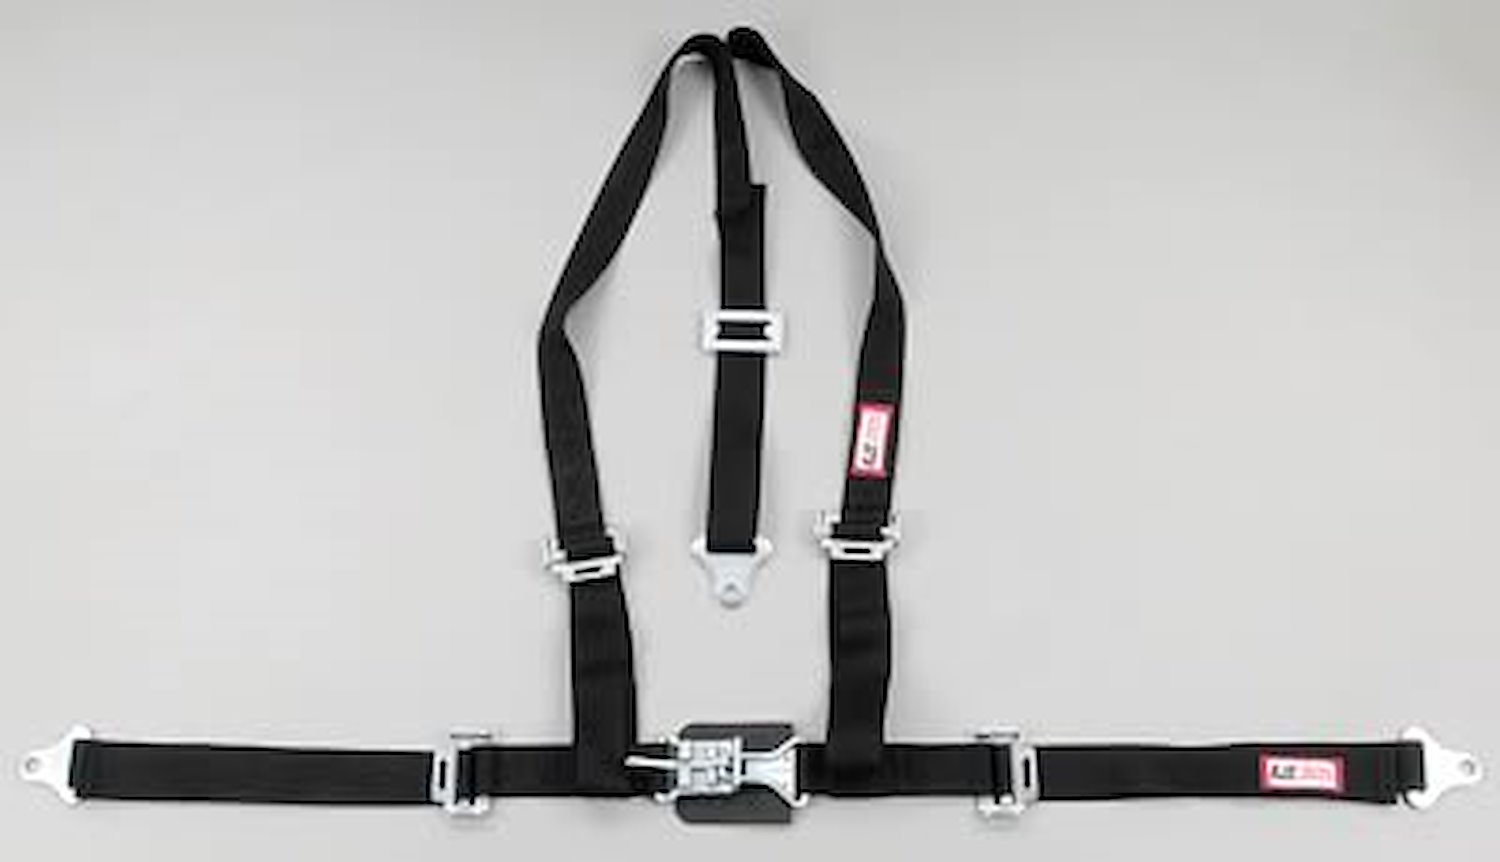 NON-SFI L&L HARNESS 3 PULL DOWN Lap BELT SNAP SEWN IN 2 S.H. Y FLOOR Mount WRAP/SNAP HOT PINK